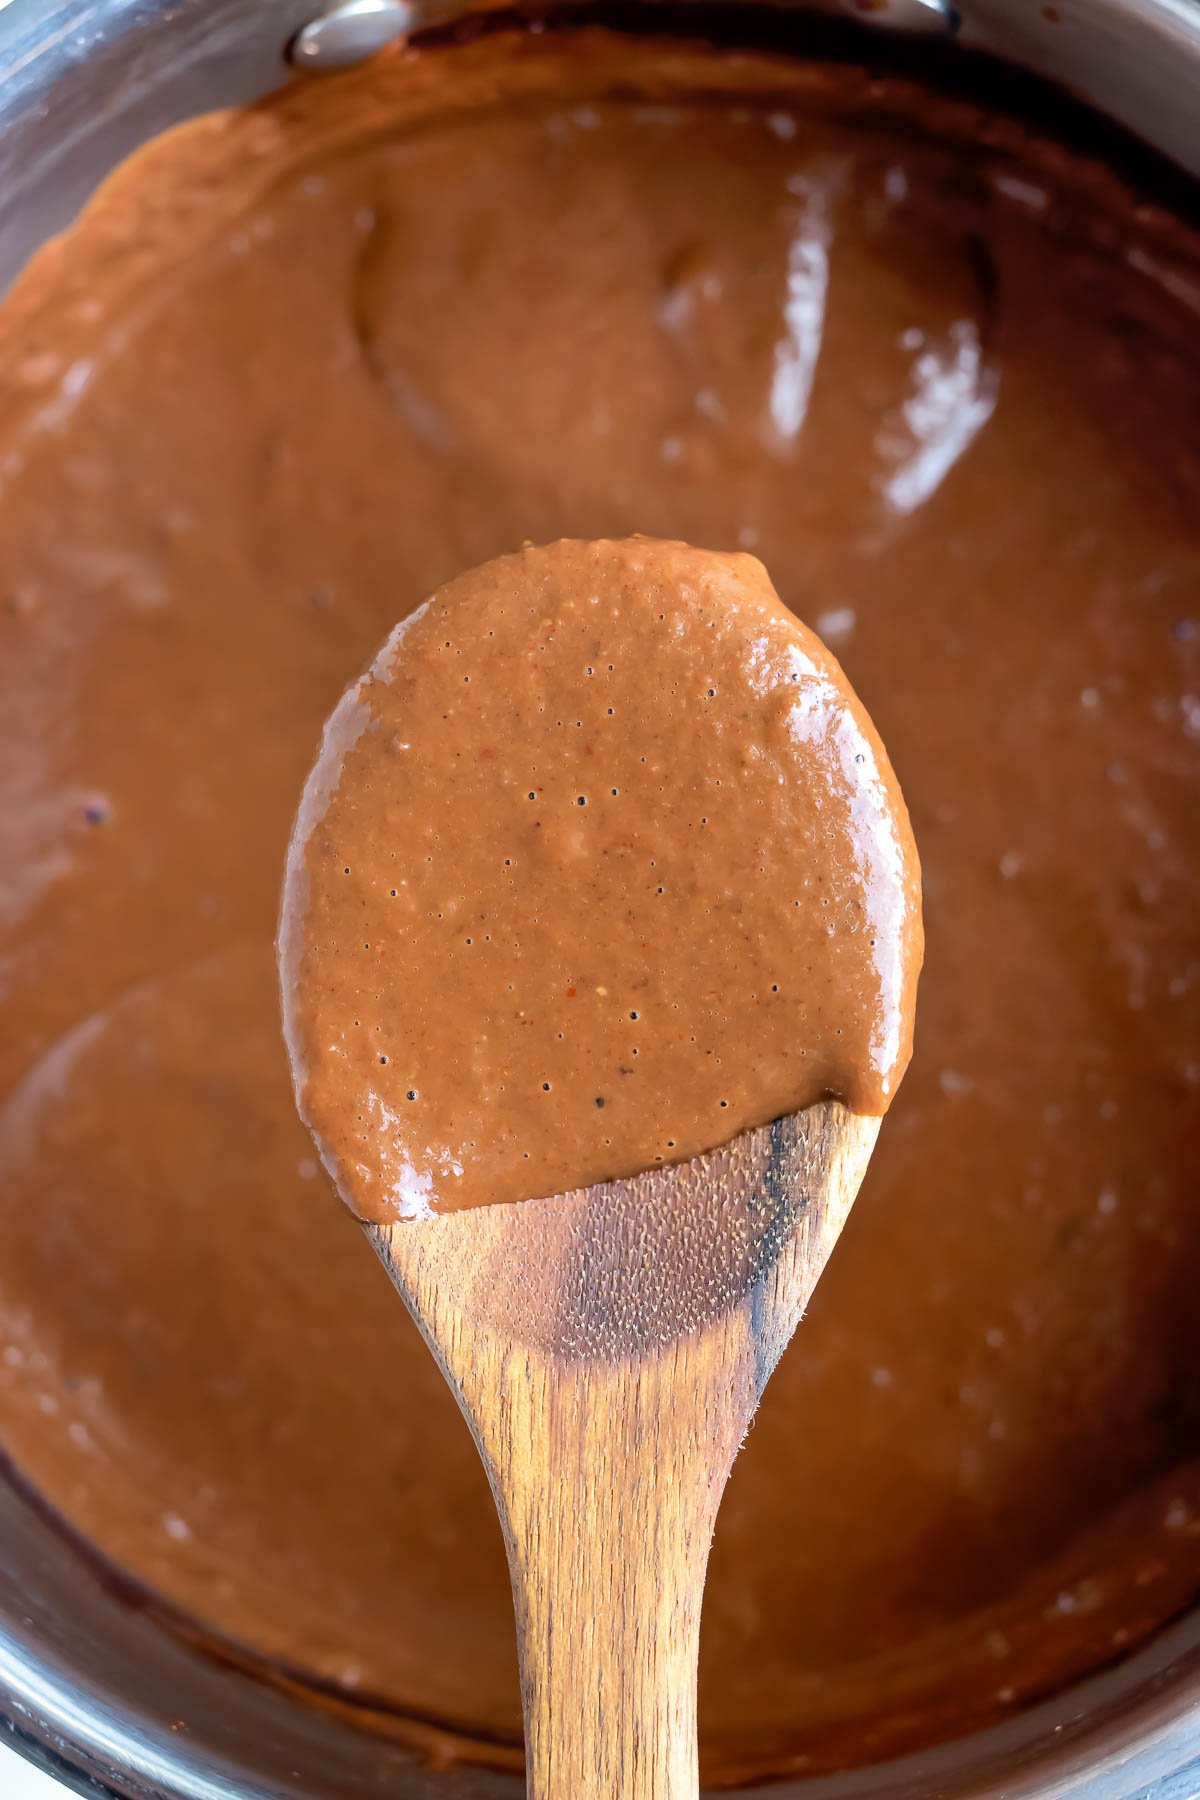 Mole sauce is lifted out of a pot with a wooden spoon.